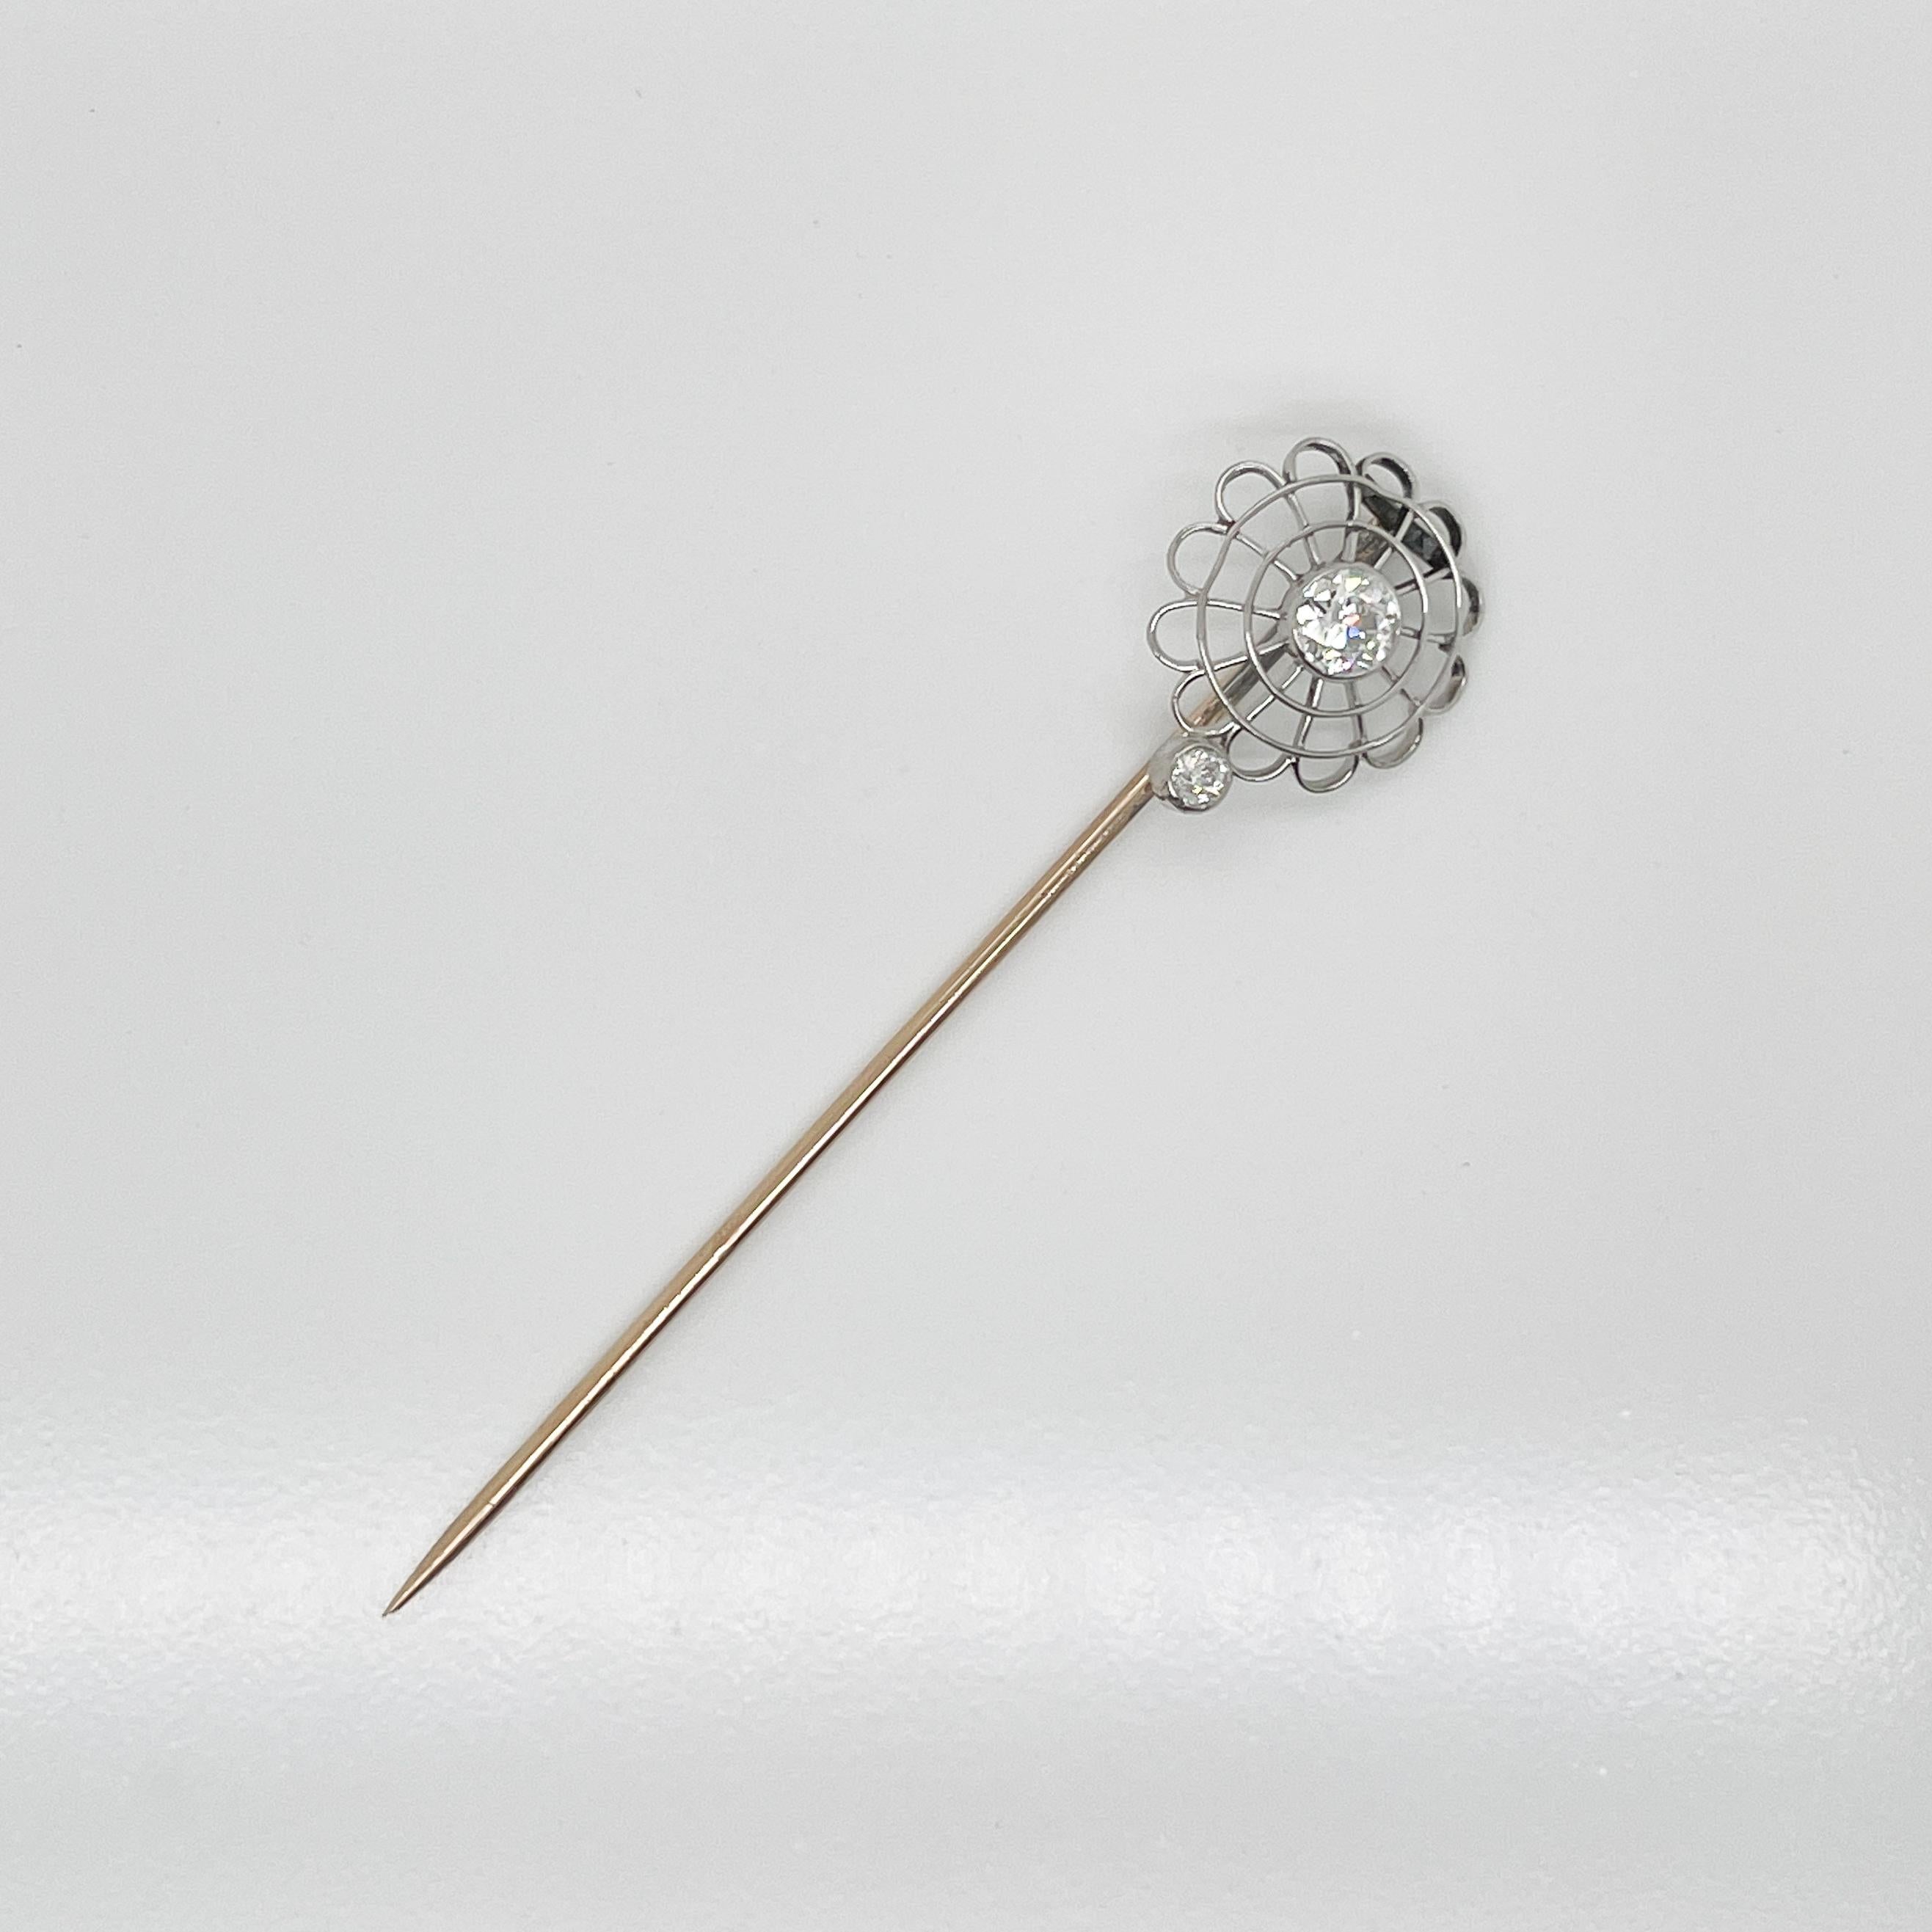 A very fine Edwardian stick pin.

In a platinum spider web (or stylized flower) pattern.

With a bezel set diamond in center and bottom of wire frame.  

Mounted on a 10k gold pin stem.

A great stick pin!

Date:
Early 20th Century

Overall